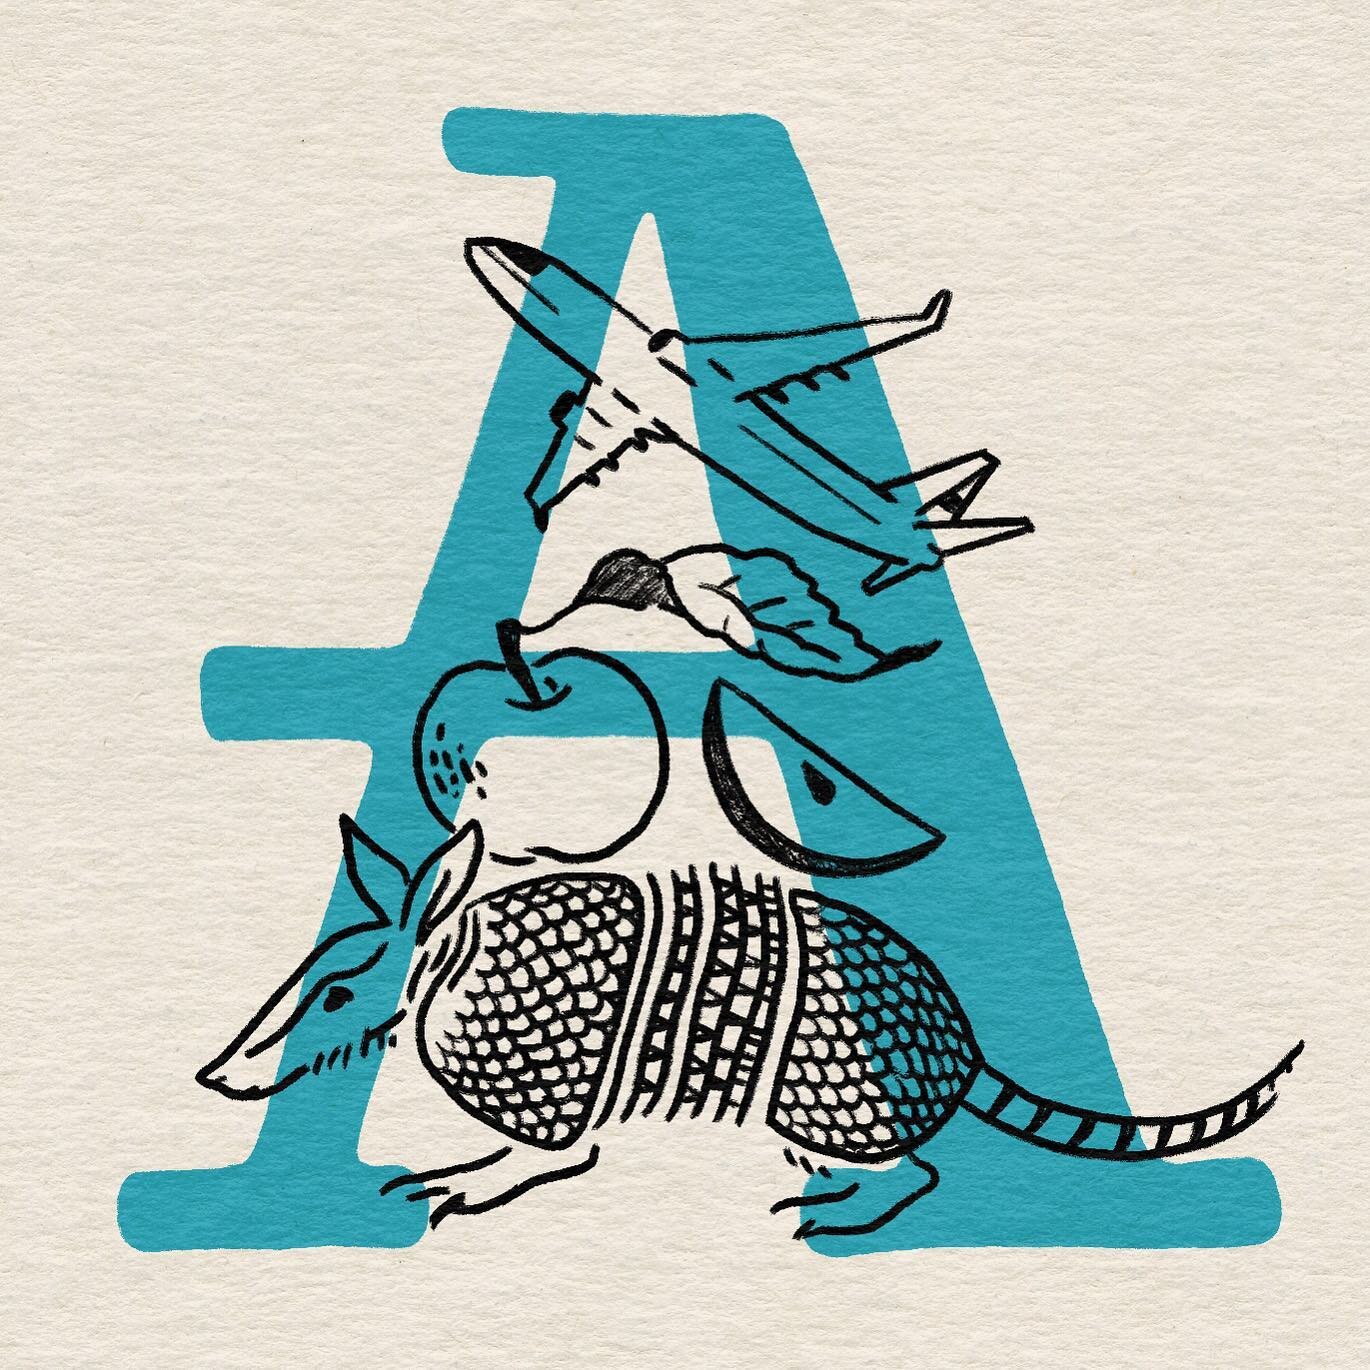 The letter A for #36daysoftype #36days_a 
&hellip;
Armadillo, apple, and airplane.